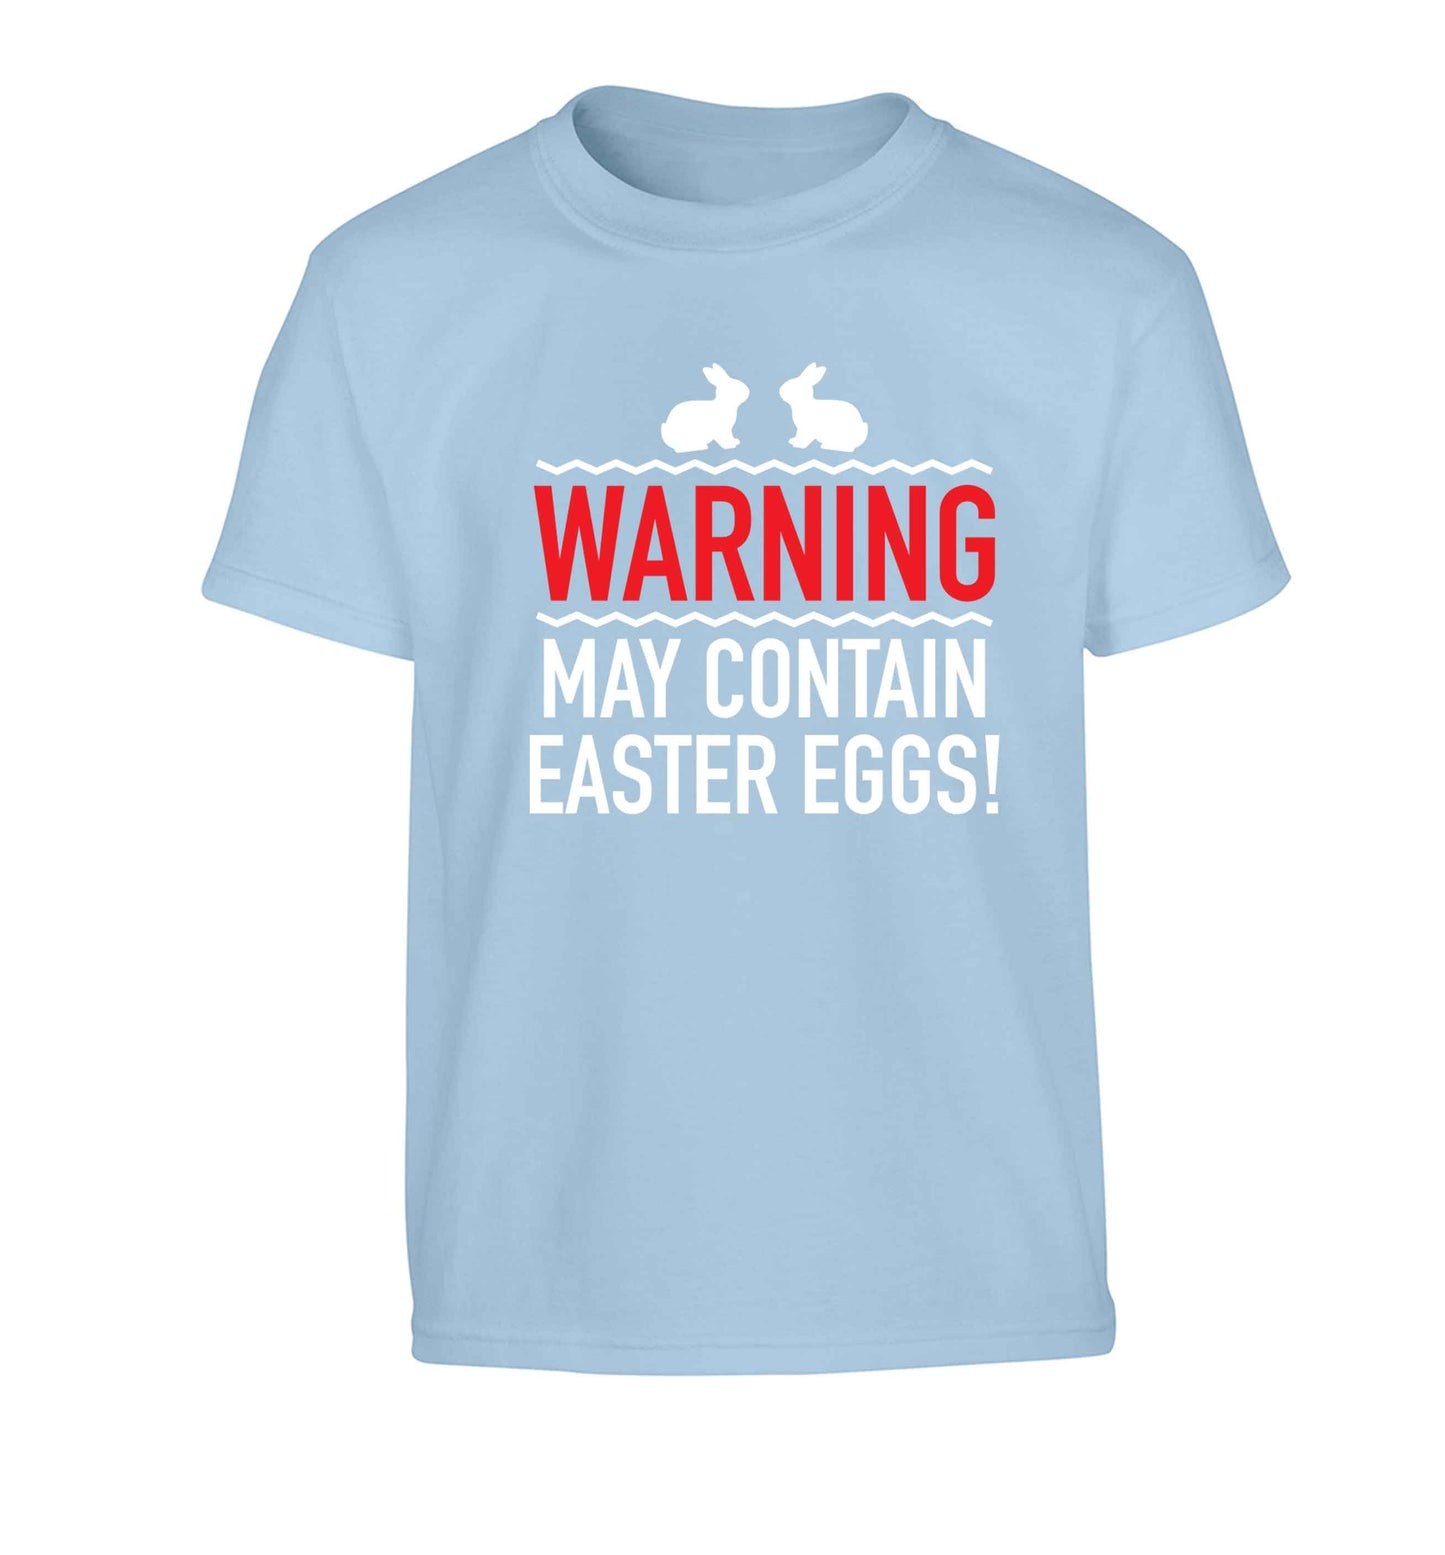 Warning may contain Easter eggs Children's light blue Tshirt 12-13 Years